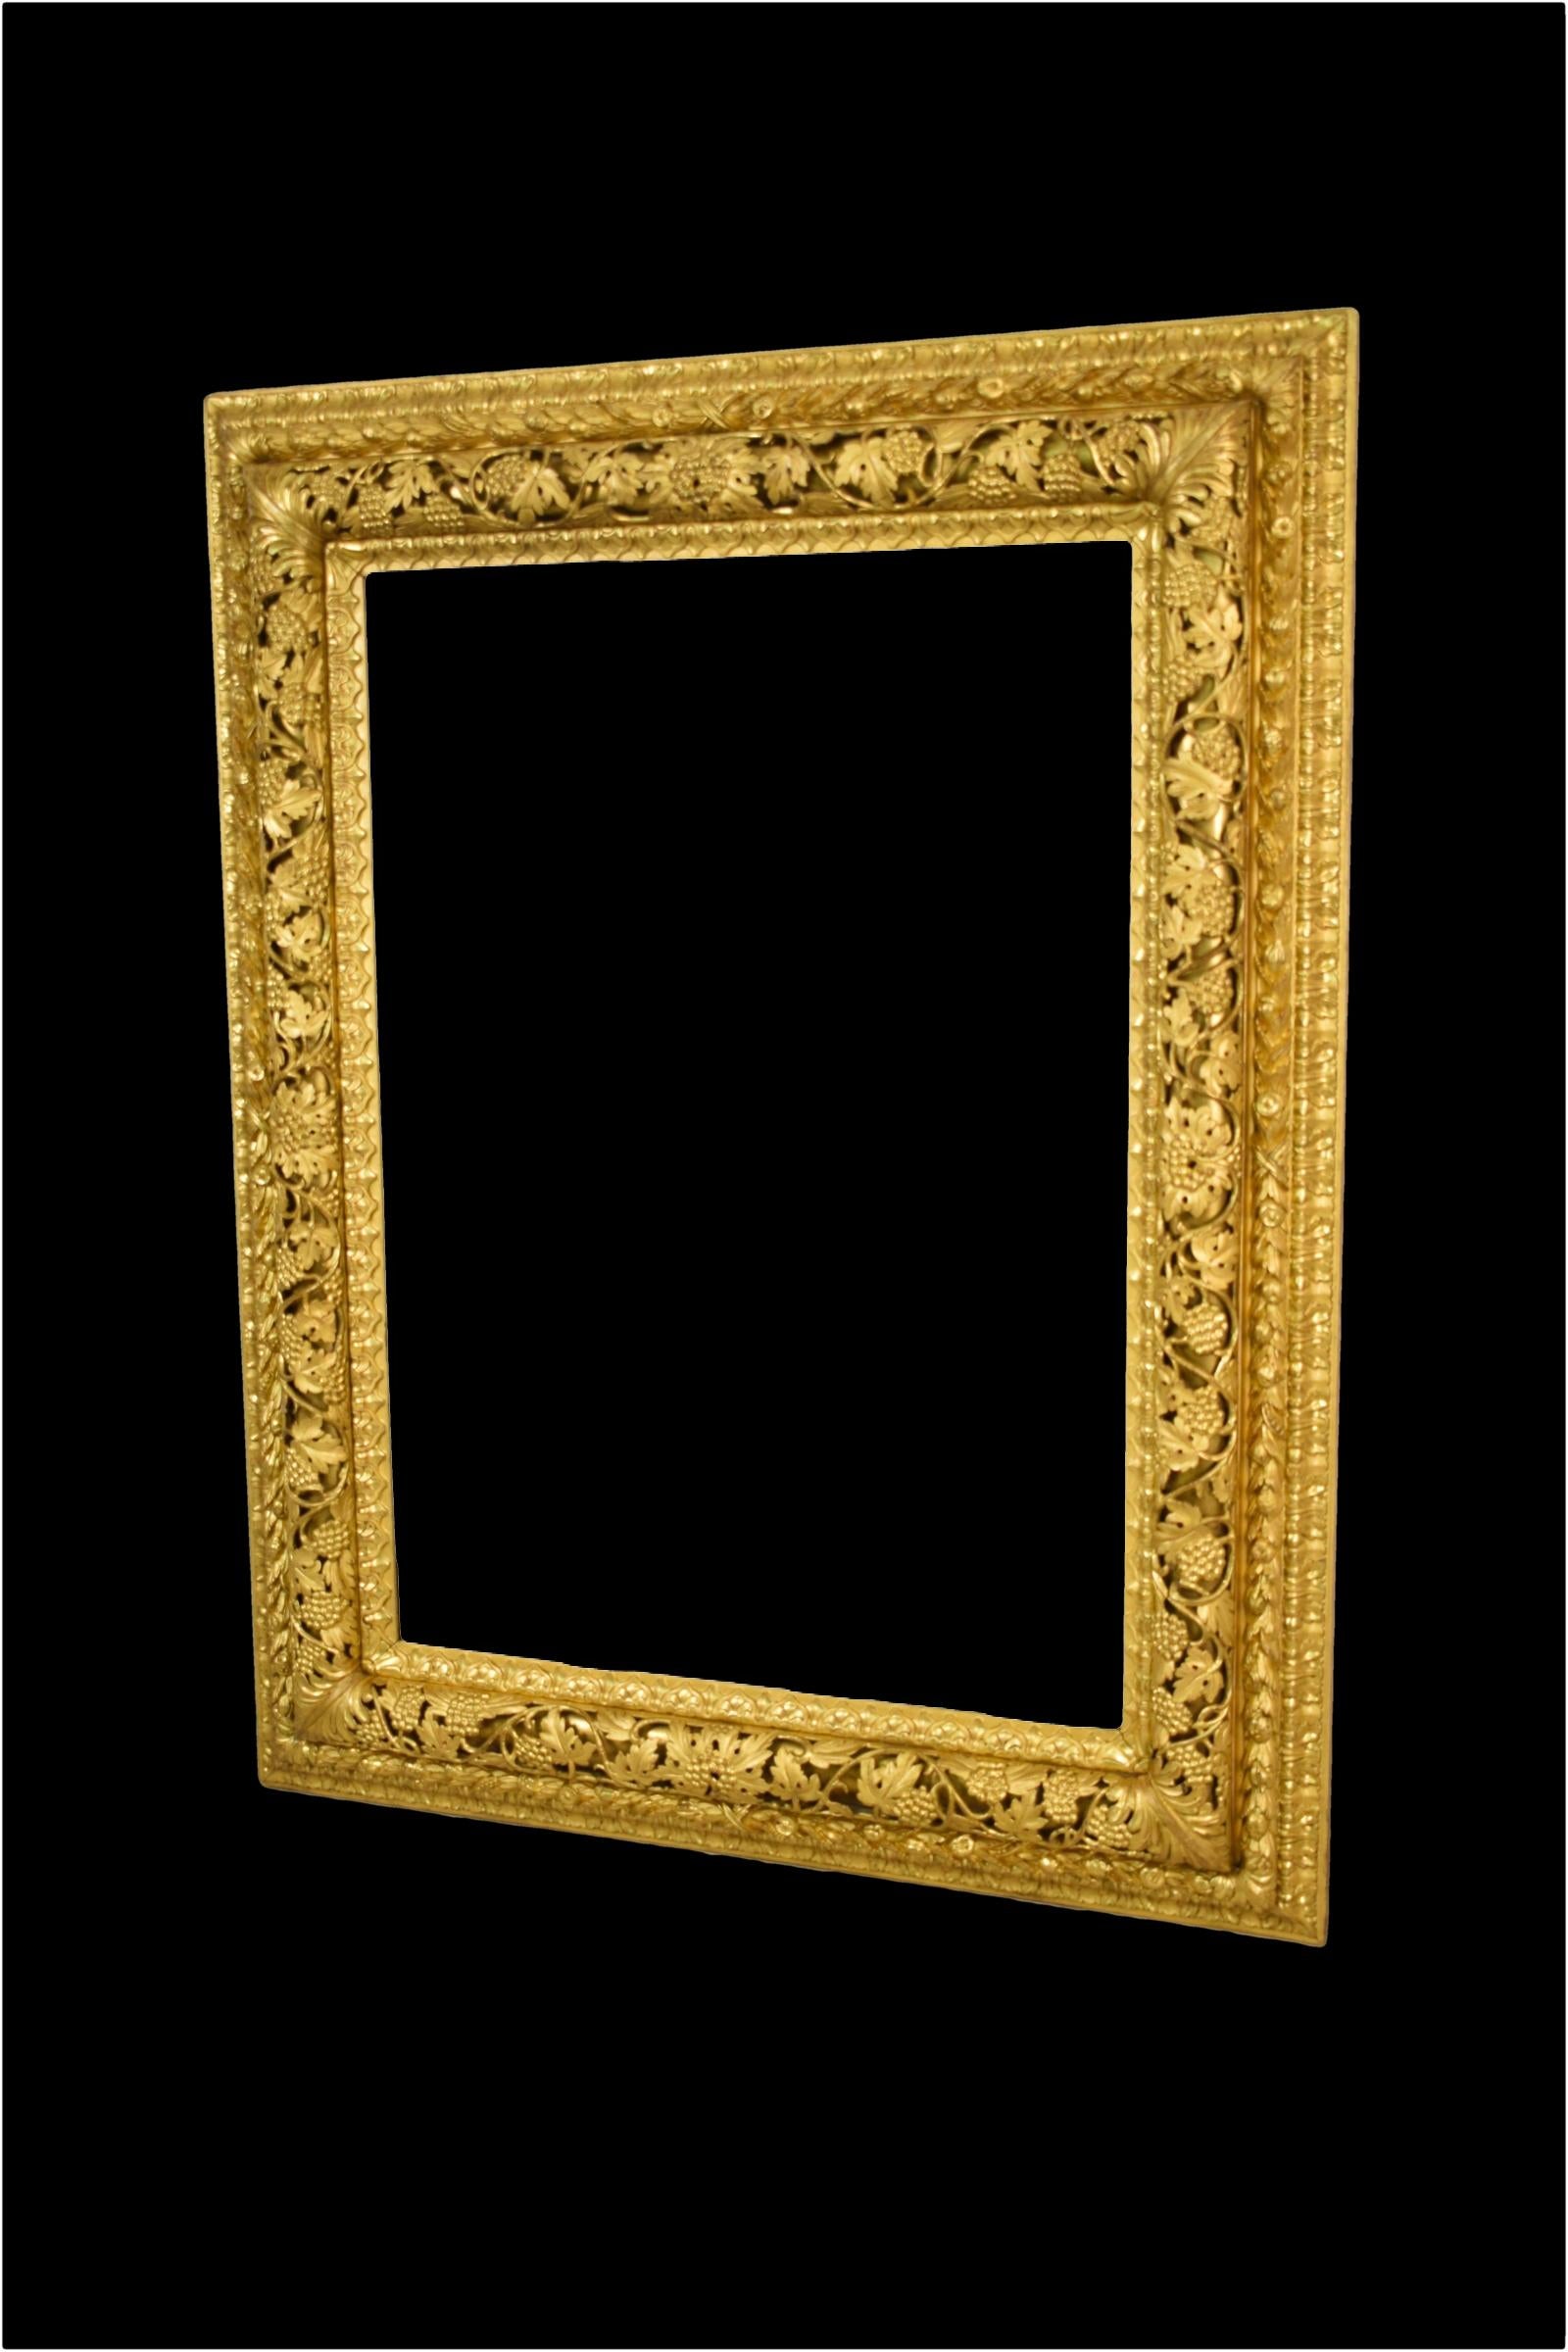 Woodwork Early 19th Venetian Rectangular Carved and Gild Mirror For Sale